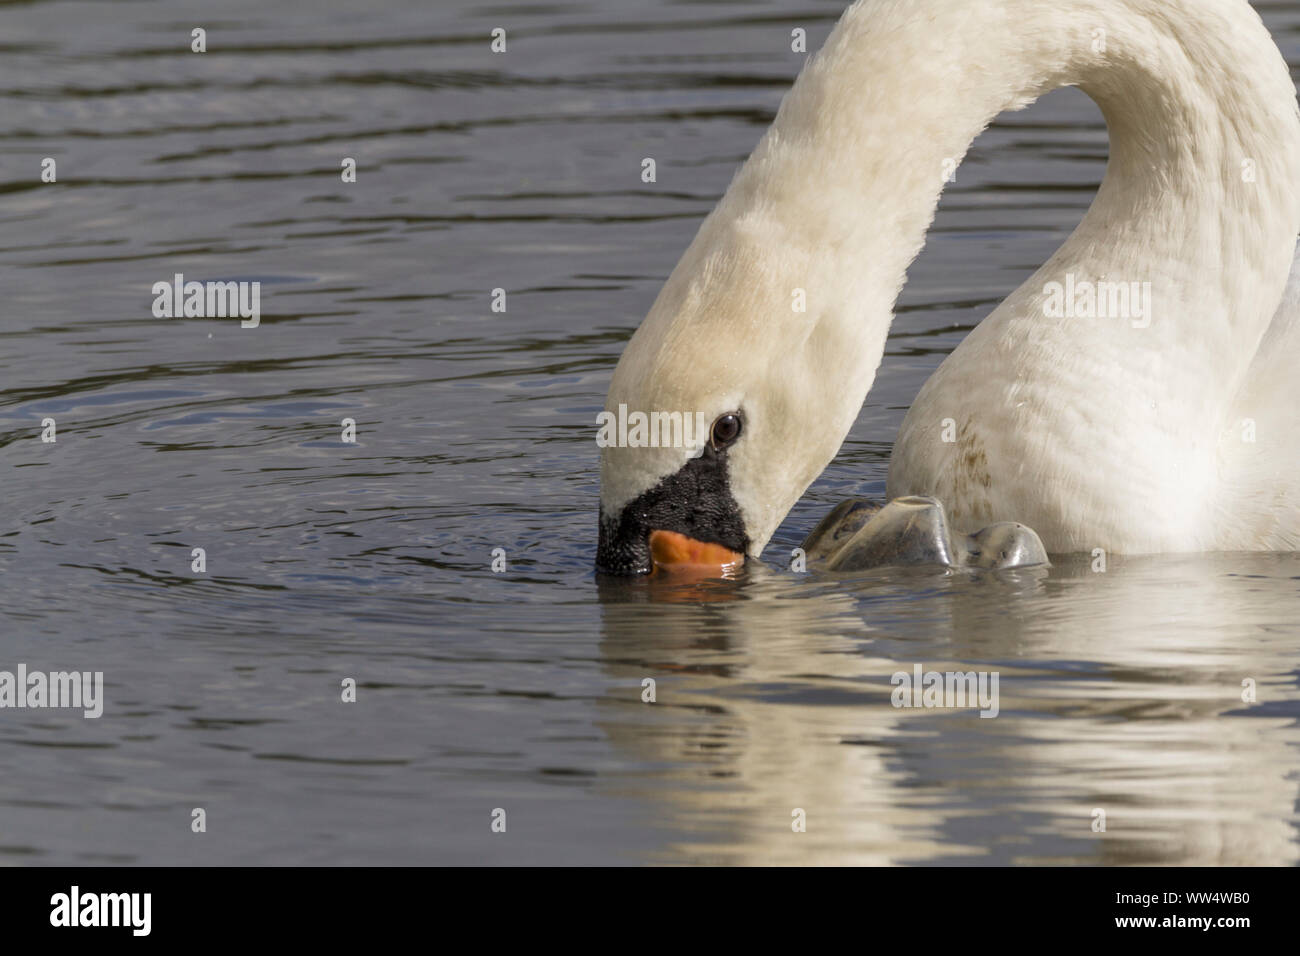 Mute swan (Cygnus olor) and plastic waste. Upturned plastic bottle in water attracting attention of a wild swan mouthing the bobbing plastic pollution Stock Photo